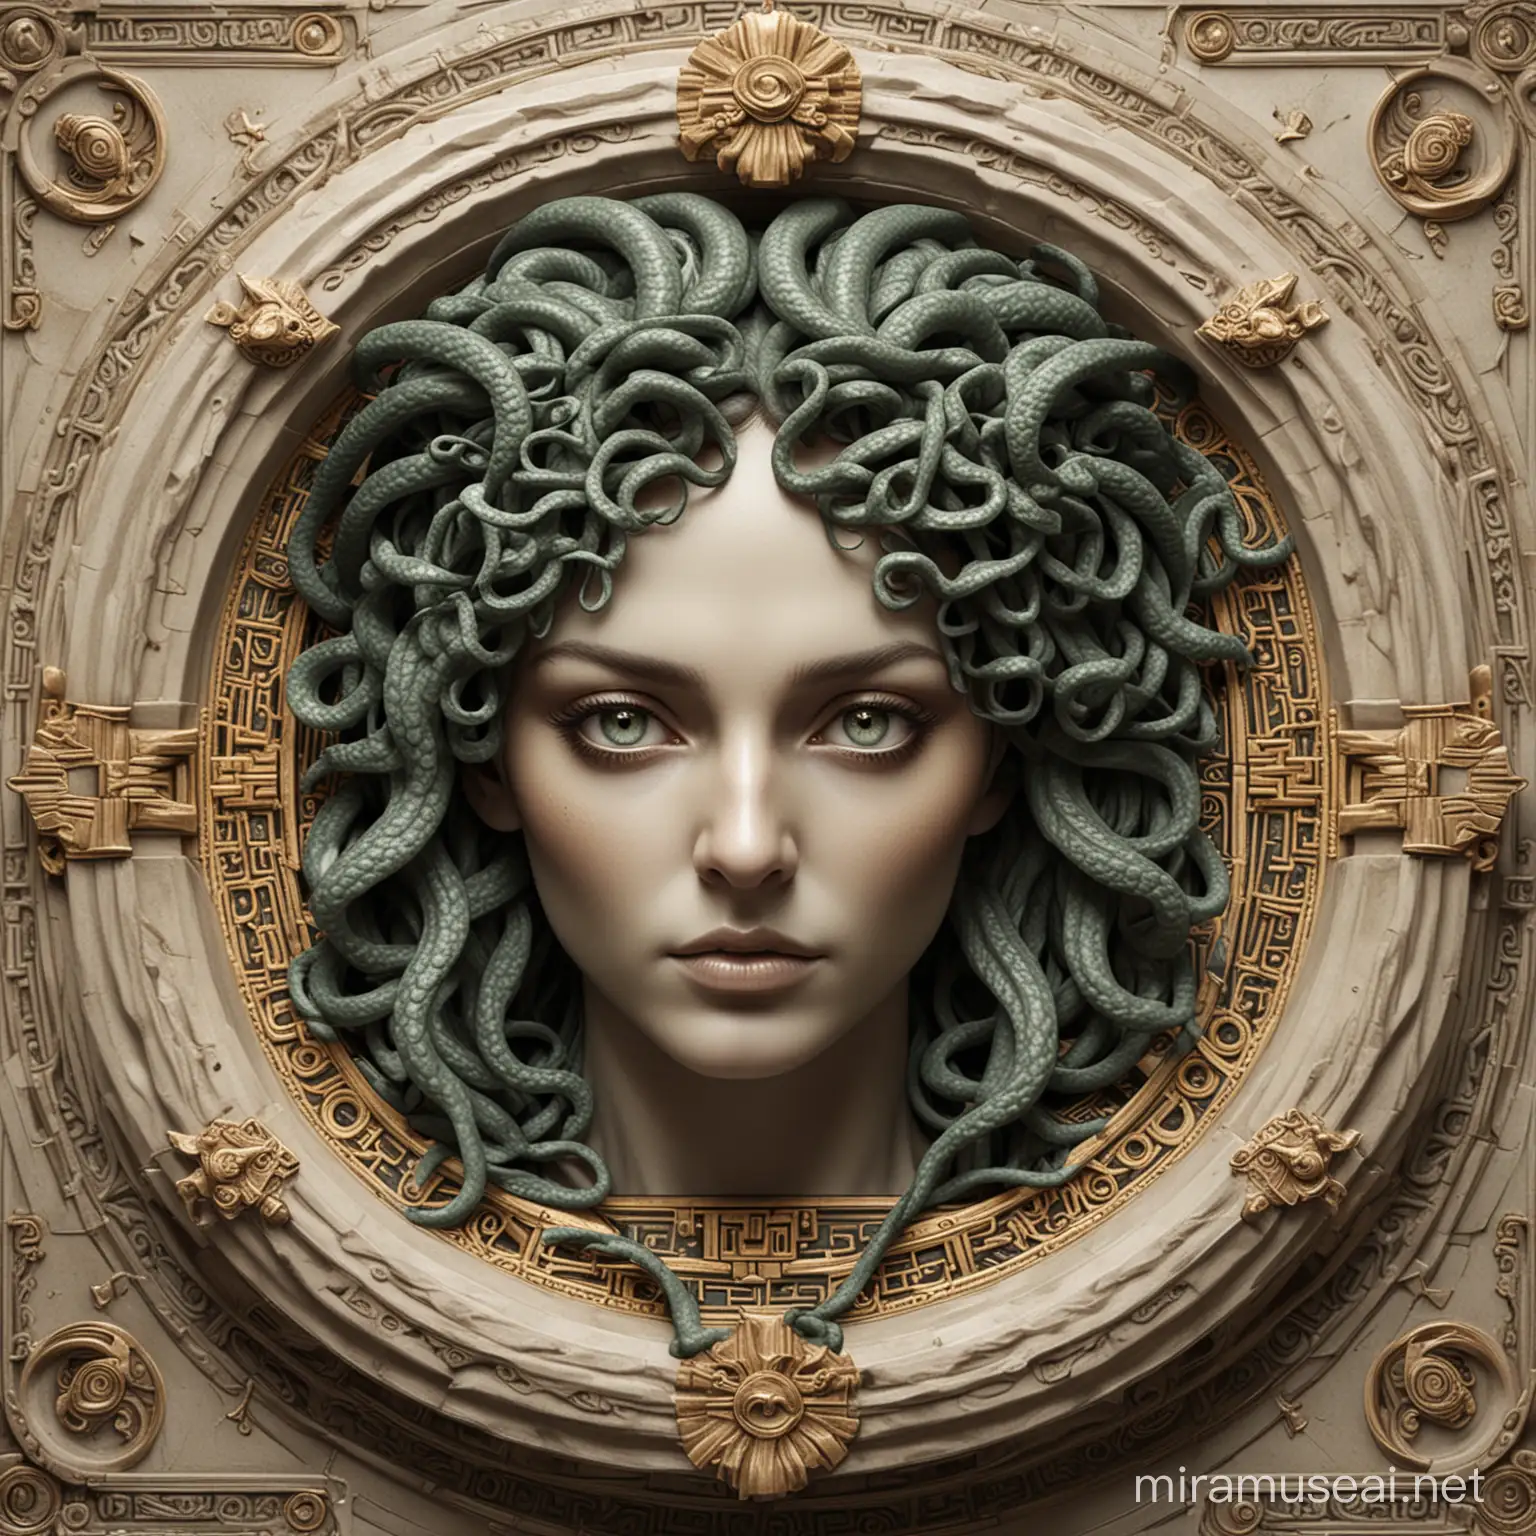 Hyper-detailed, realistic image of Medusa, from Greek mythology. Striking image face on, looking into her eyes. Surrounded by an art deco geometric frame. 